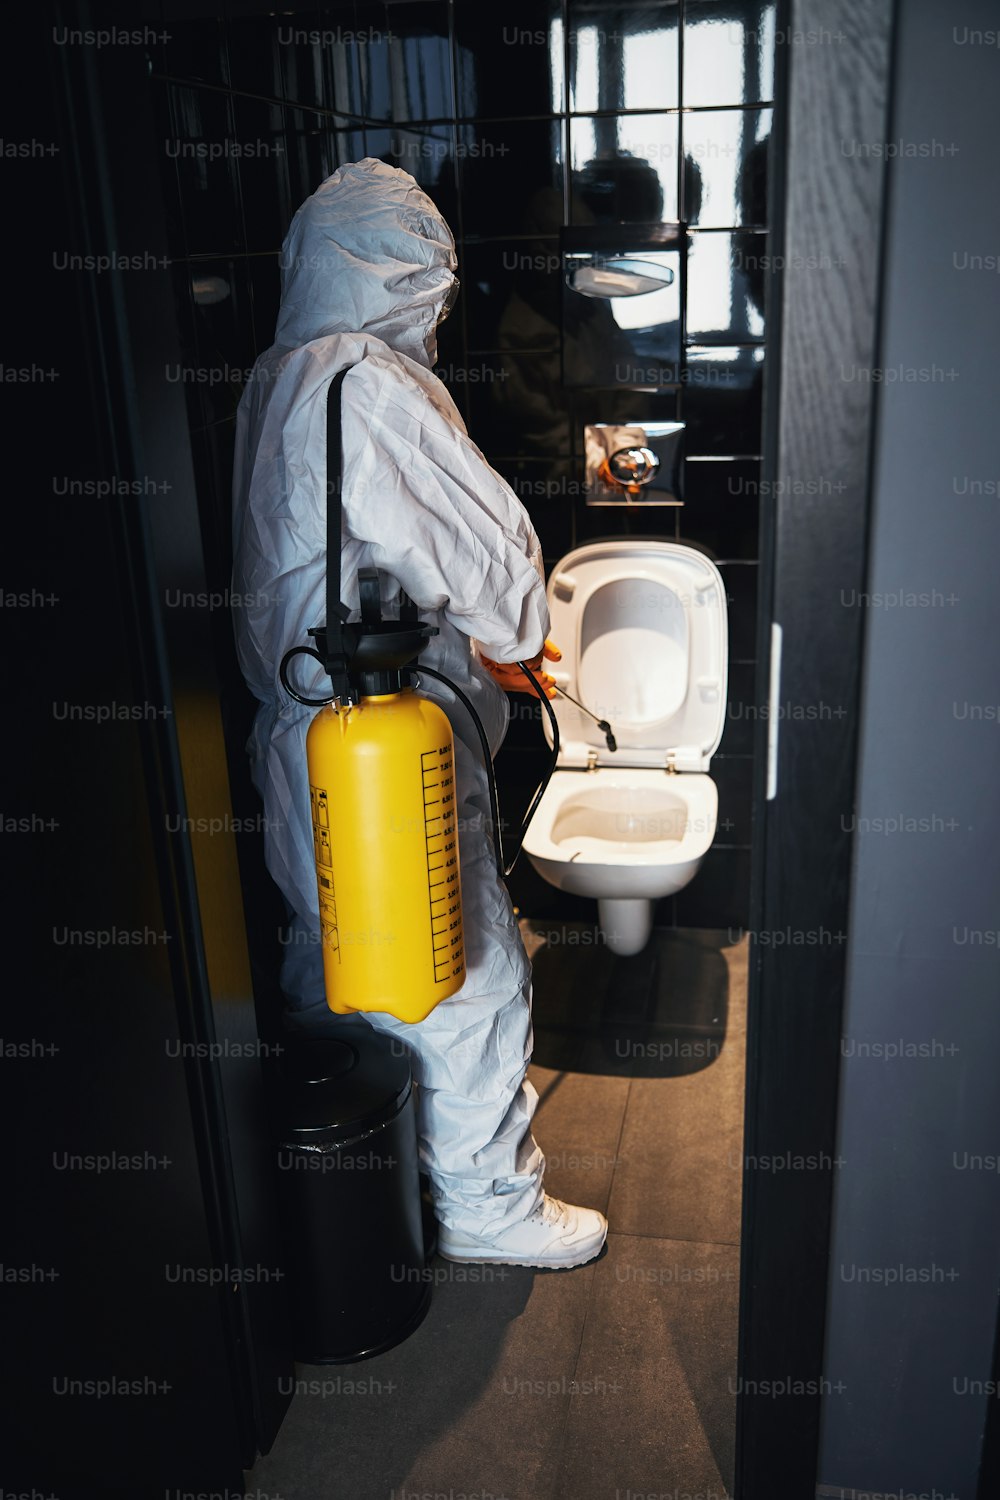 Back view of a professional cleaner in a hazmat suit and rubber gloves spraying a disinfectant on the toilet bowl